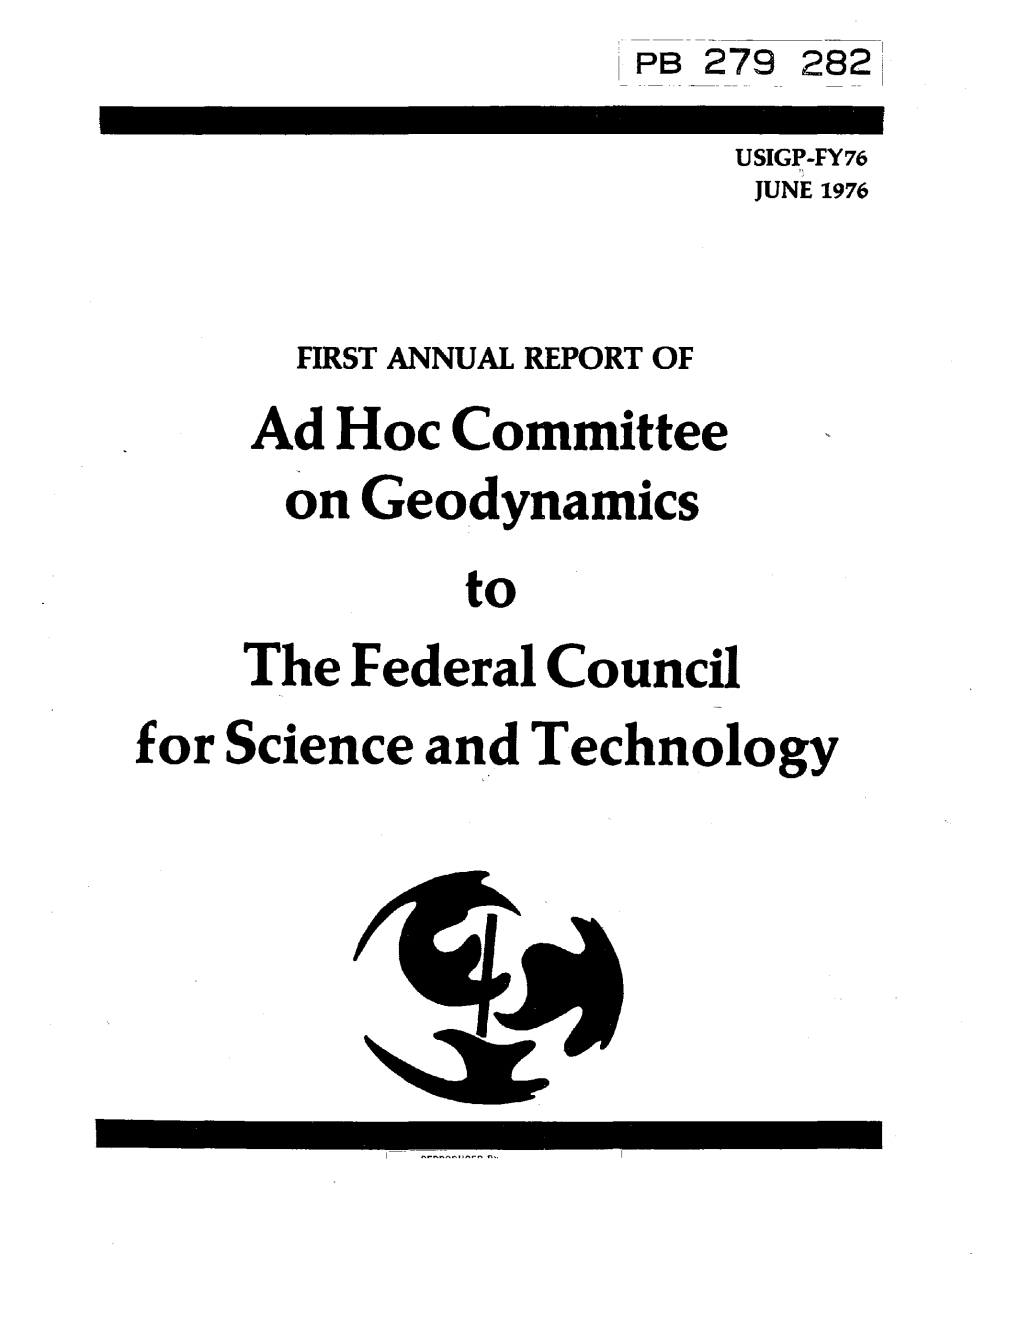 Ad Hoc Committee on Geodynamics to the Federal Council for Science